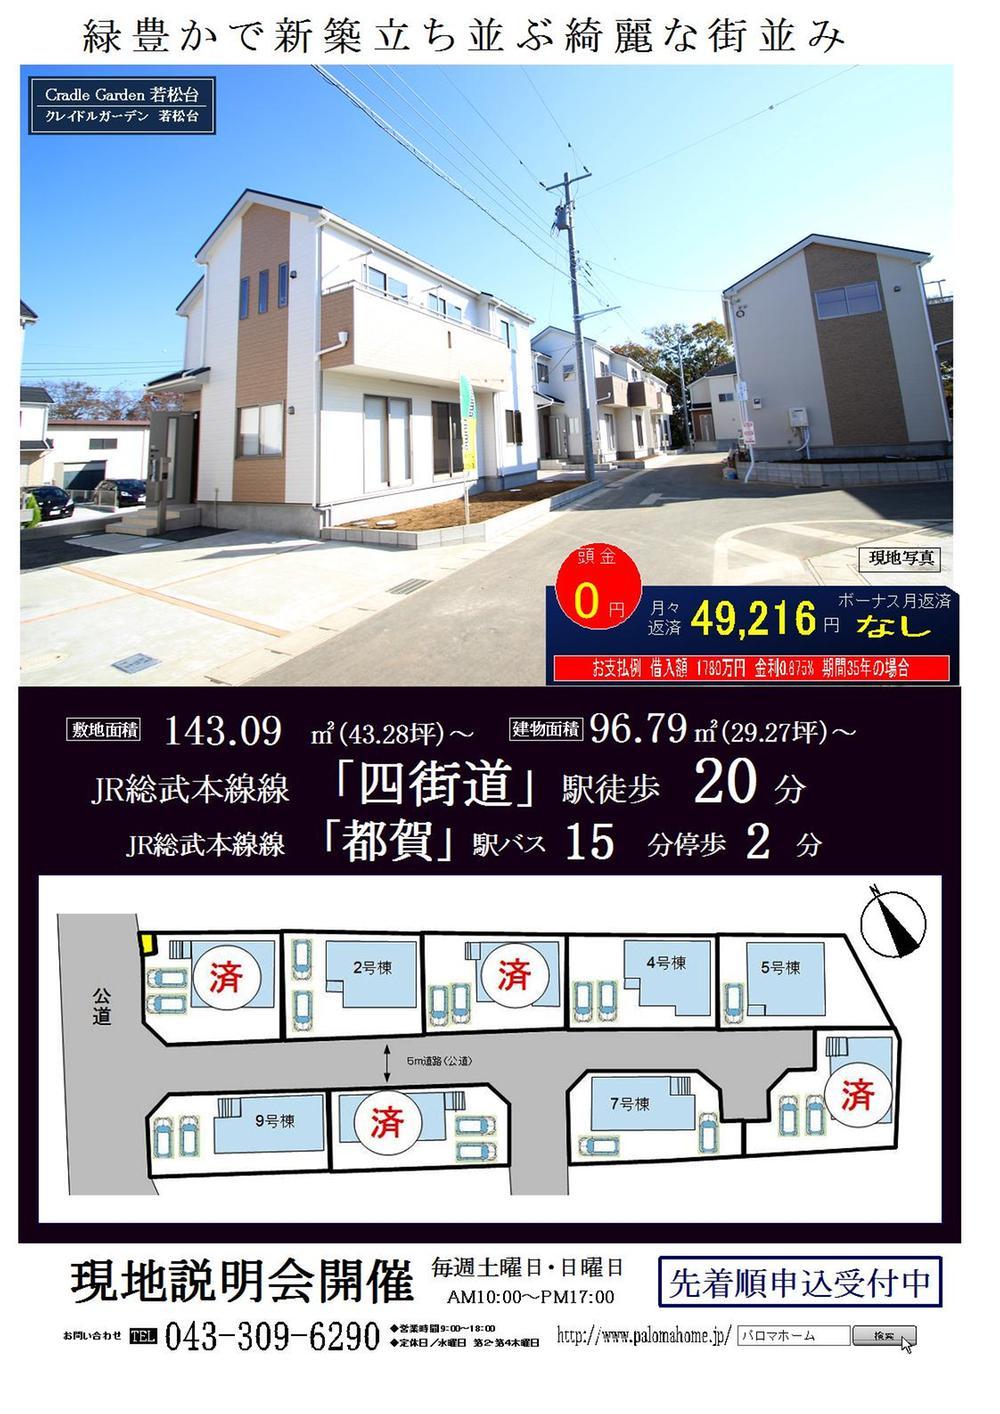 Other. Cradle garden Wakamatsudai 112th February Change all building amount! From 17.8 million yen